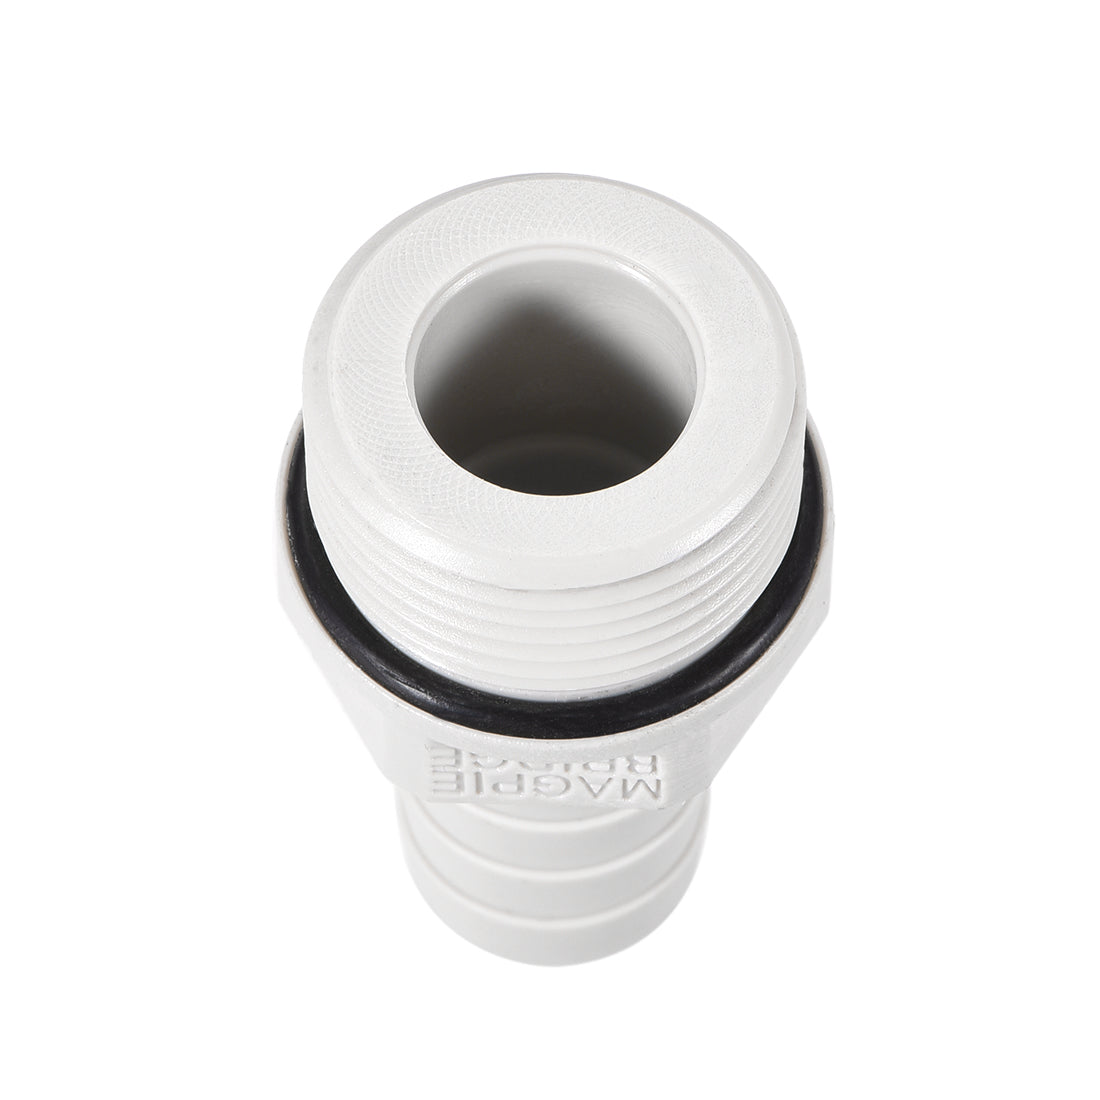 Uxcell Uxcell PVC Barb Hose Fitting Connector Adapter 10mm or 25/64" Barbed x 1/8NPT Male Pipe 2pcs